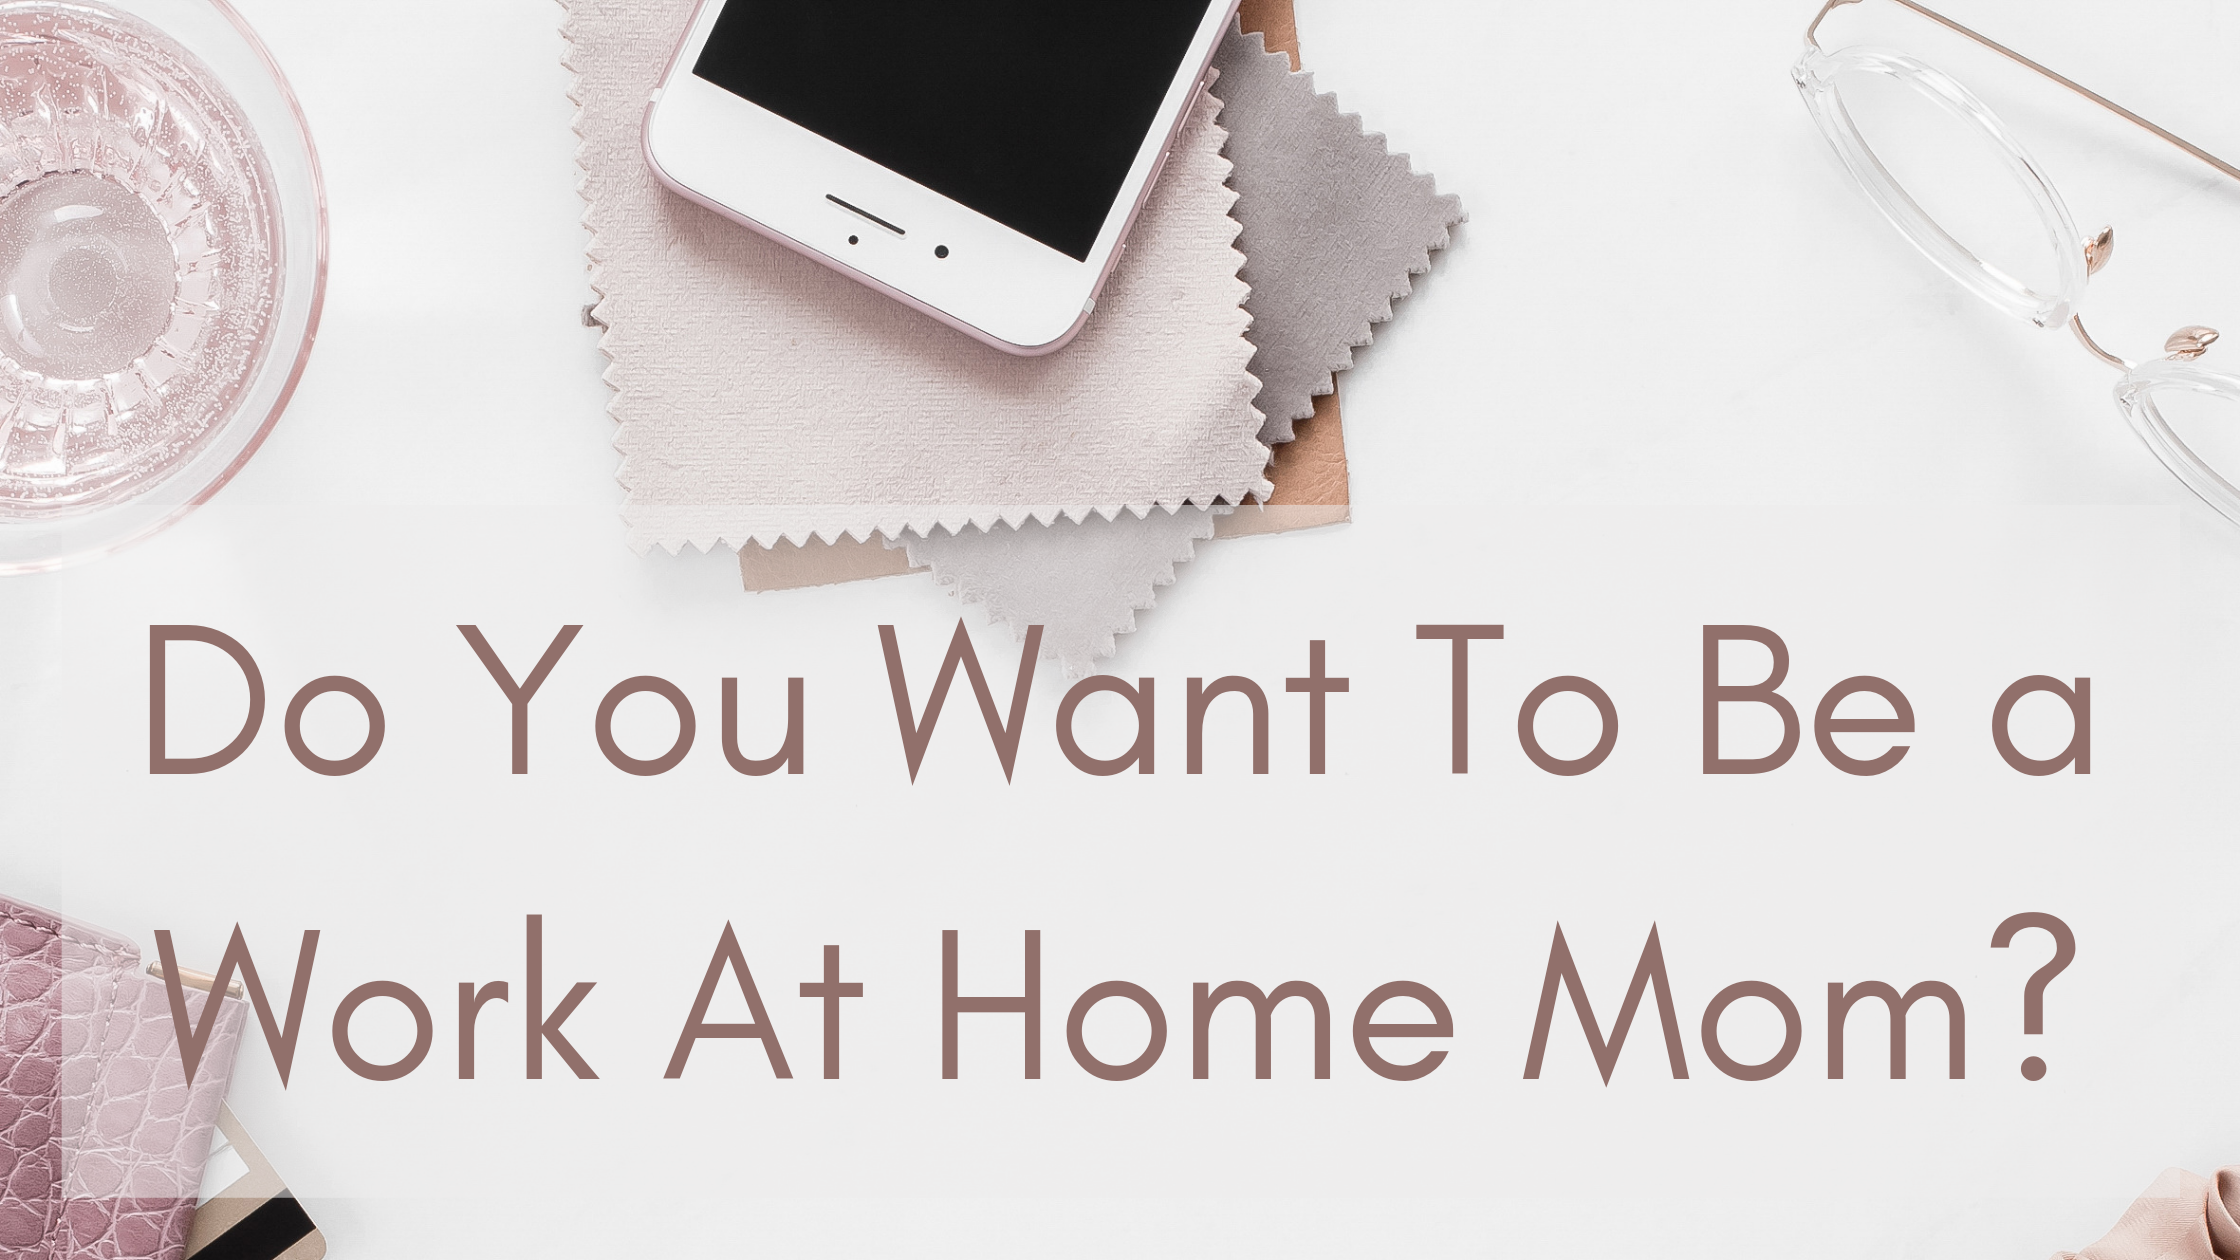 Do You Want to be a Work at Home Mom?